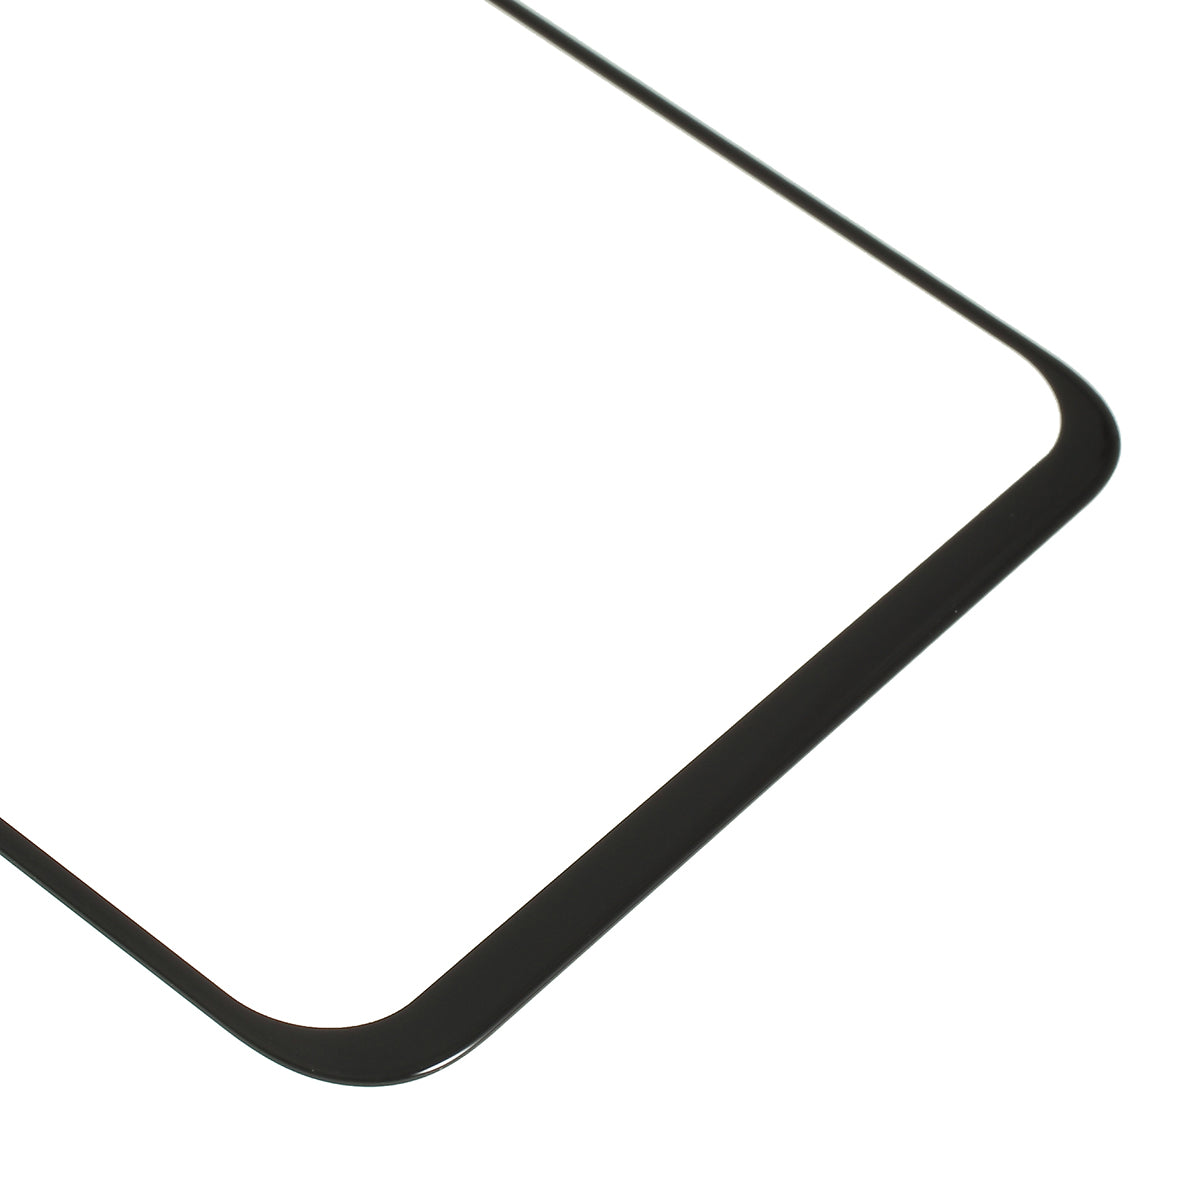 Front Glass Lens Replacement for Samsung Galaxy S10e - Black